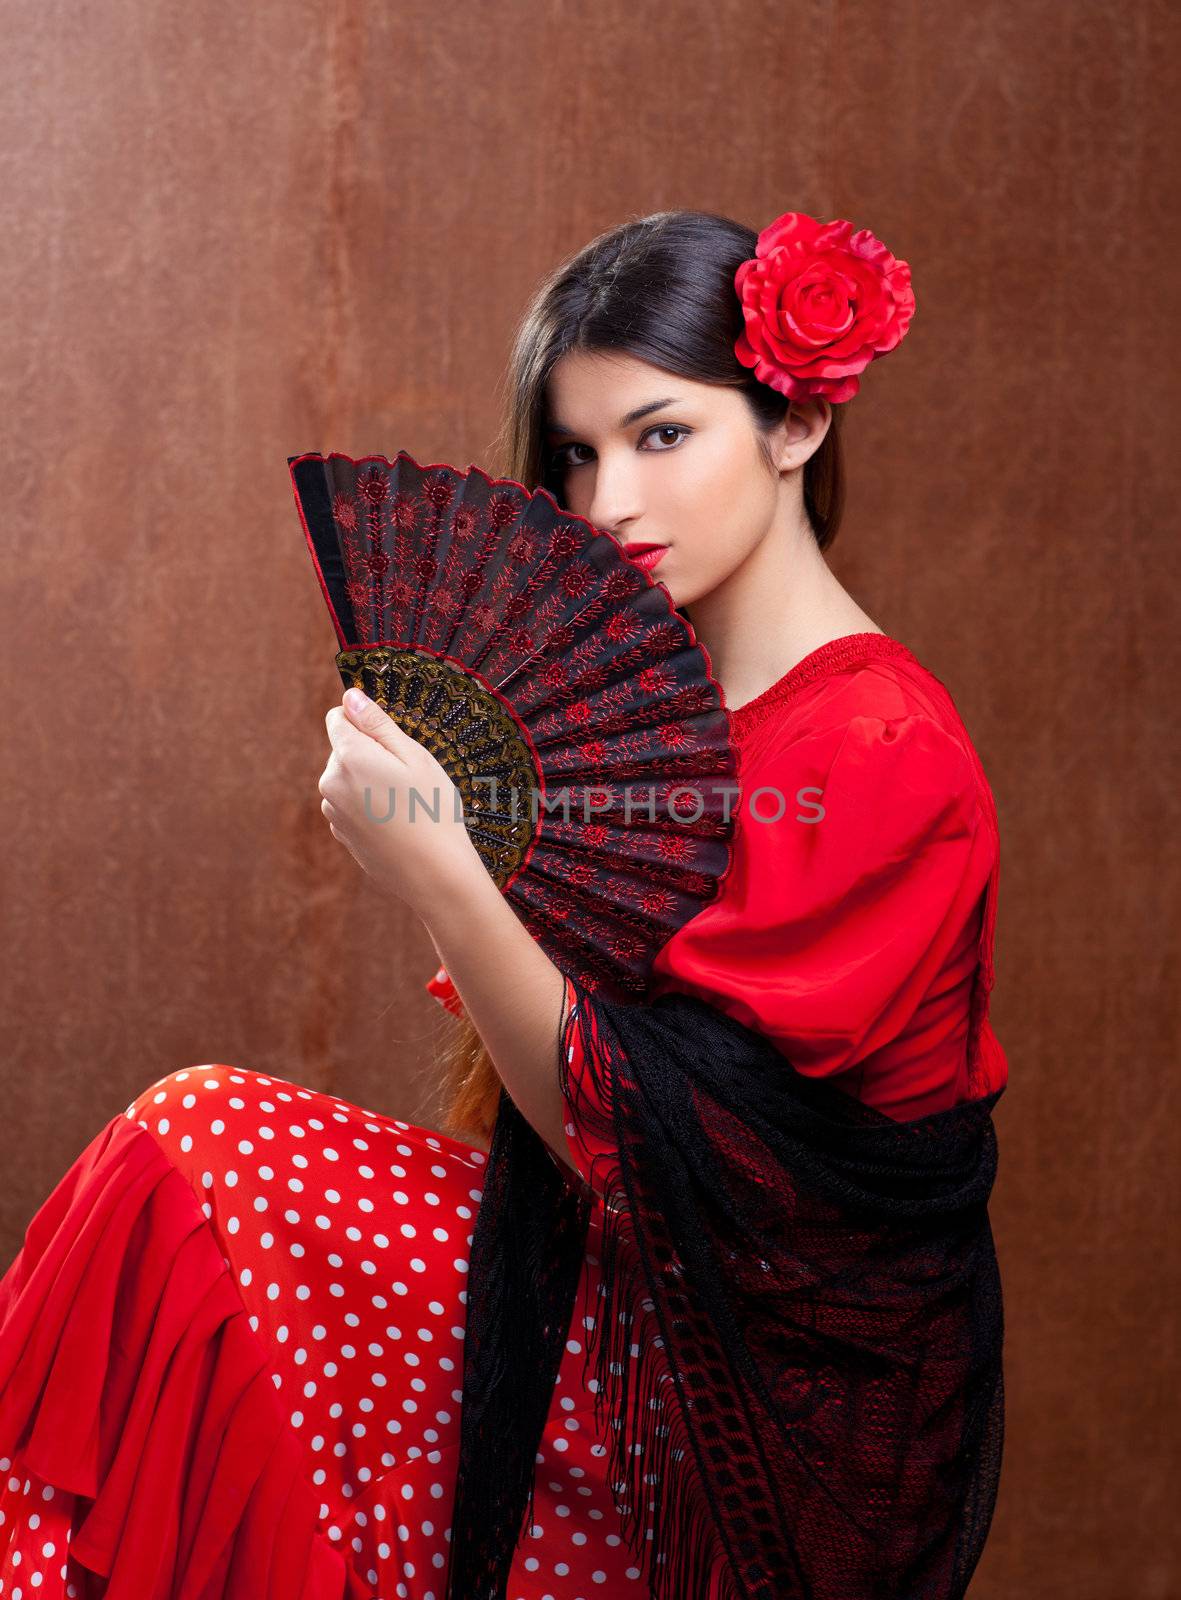 Flamenco dancer Spain woman gipsy with red rose and spanish hand fan